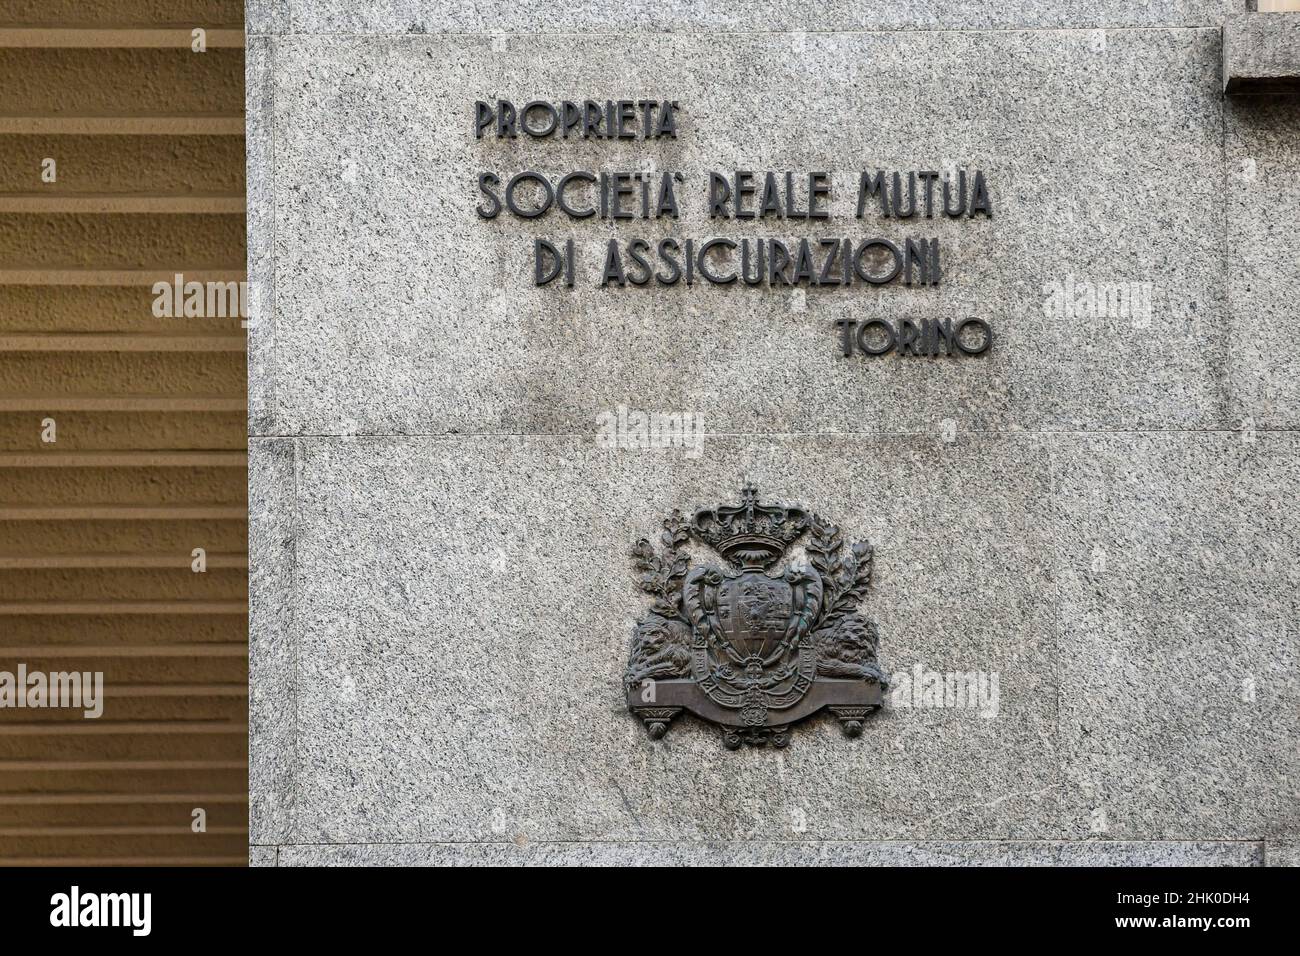 Detail of the old sign of Società Reale Mutua di Assicurazioni, a mutual insurance company founded in Turin in 1828, on a building exterior, Piedmont Stock Photo